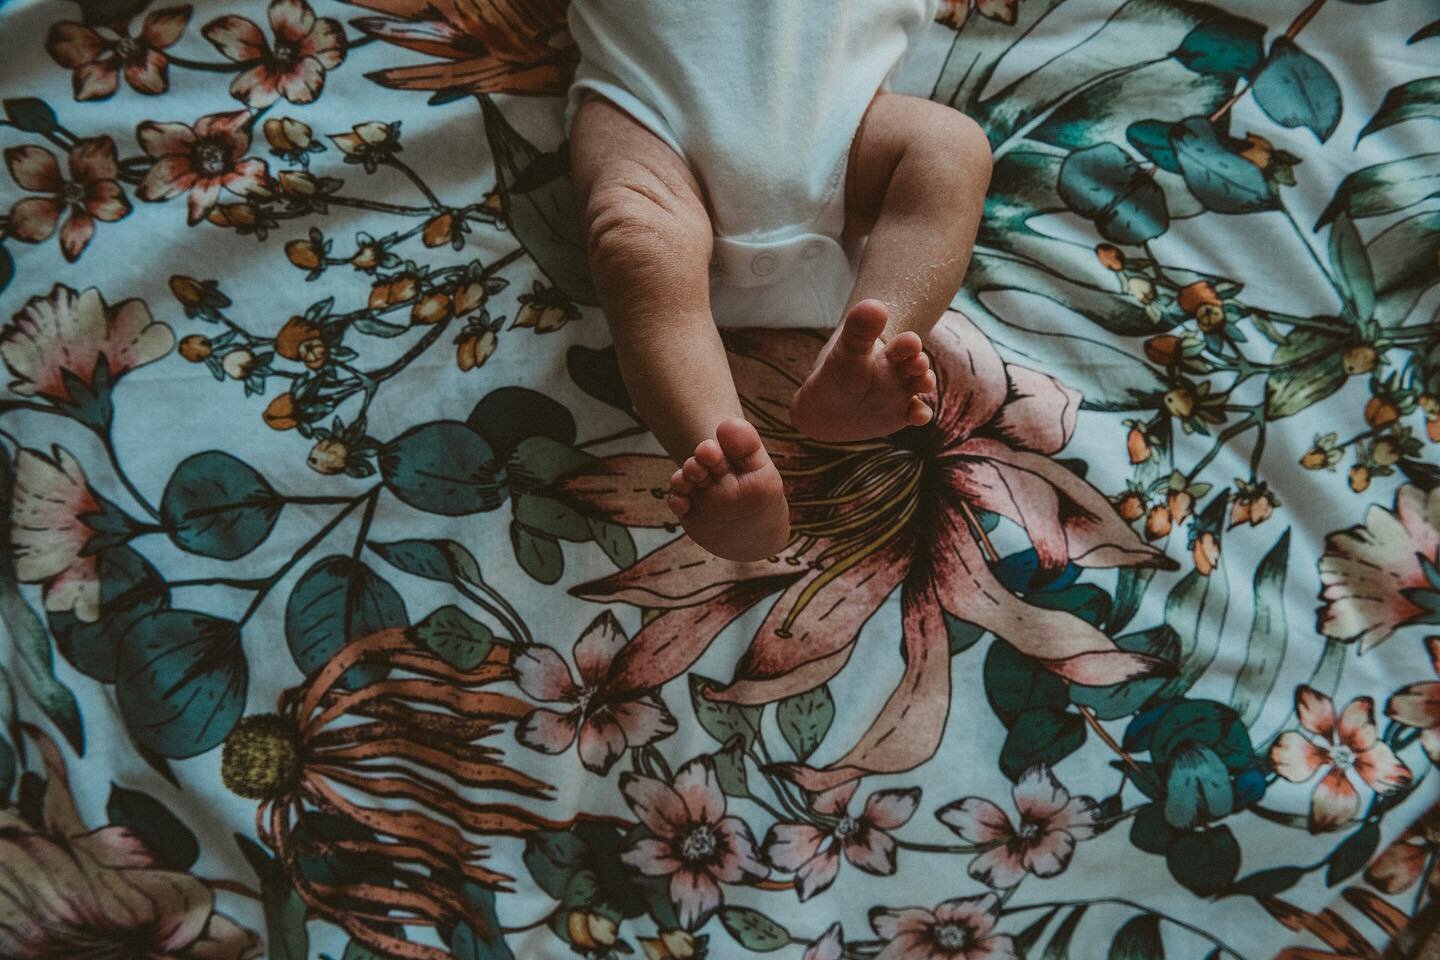 Tiny toes. 

So small, the wrinkly legs, the creases and the flaky skin 🤎

Let me capture your new baby, those details that never want to be forgotten. 
Record those wonderful moments 🤍

#themotherhoodstoryteller

#motherhoodjourney 
#newbornphotog